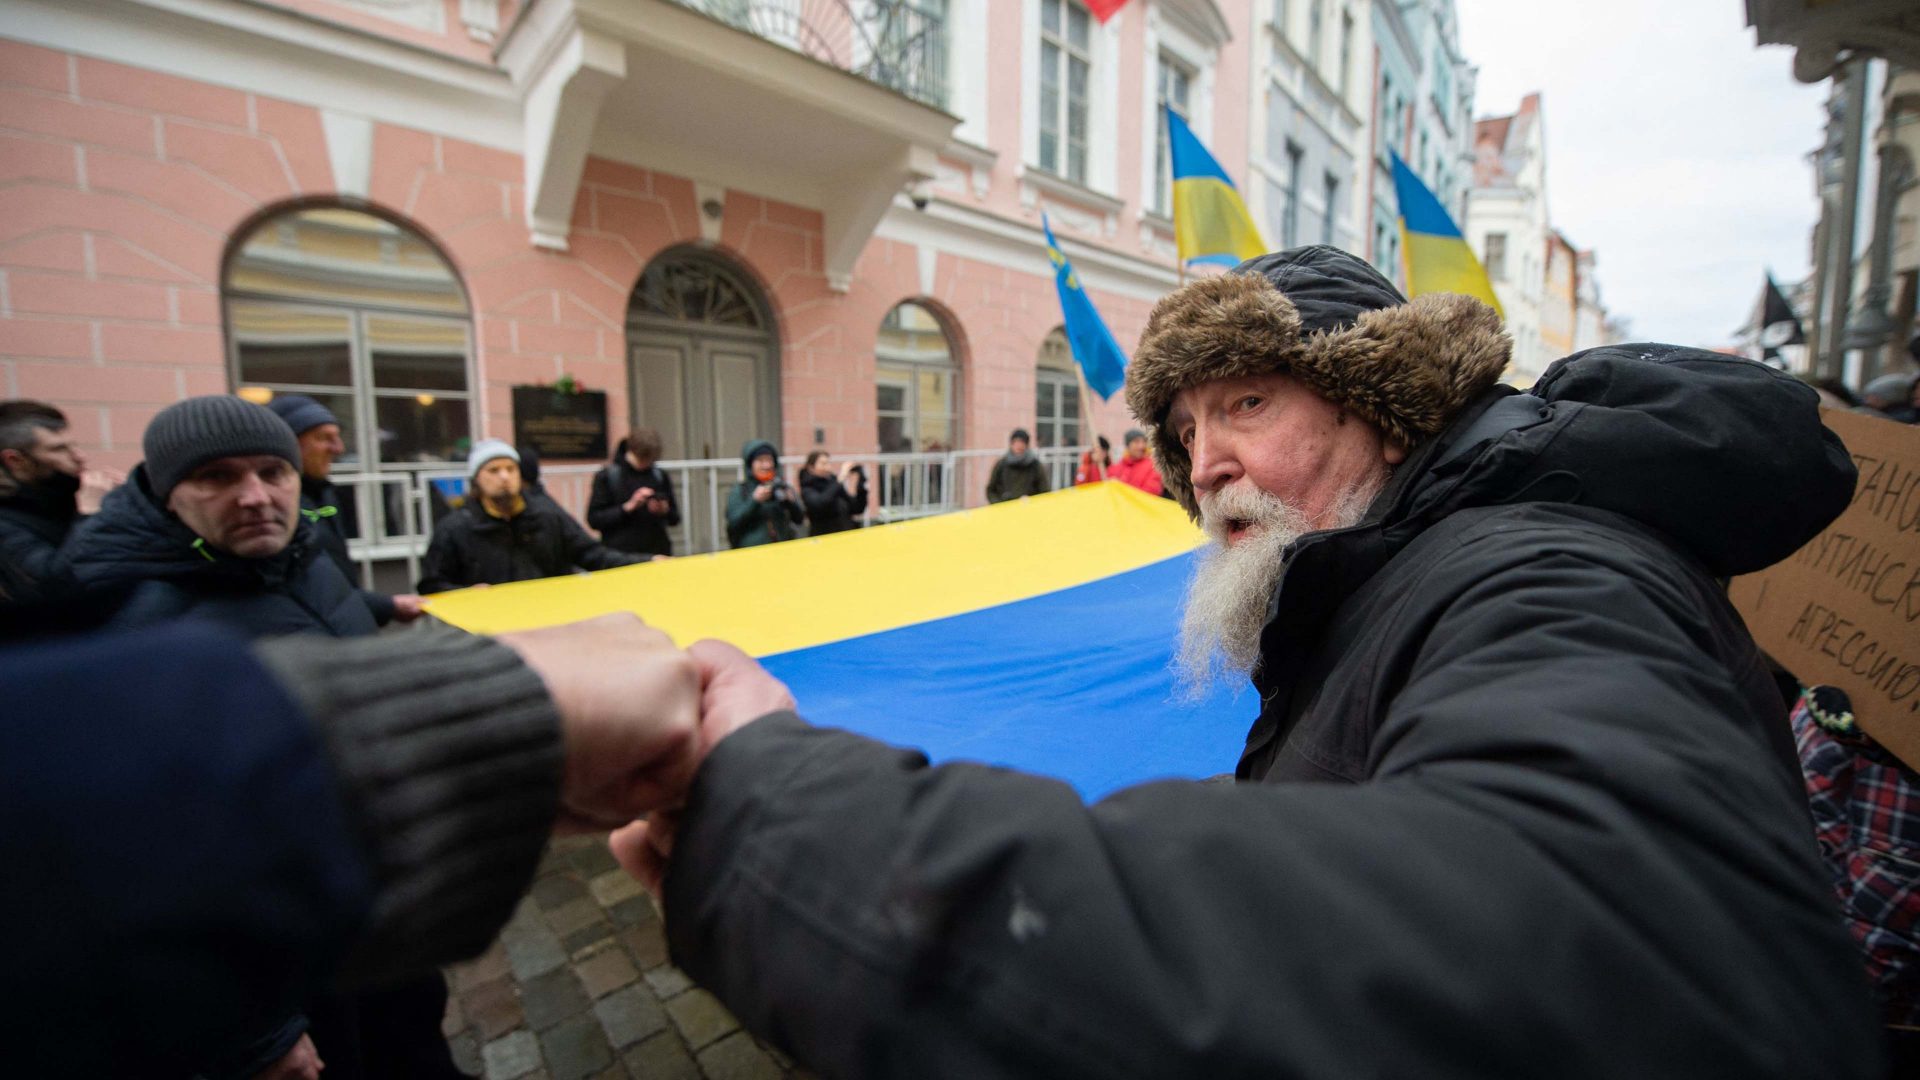 Demonstrators protest against Russia’s invasion of Ukraine on February 24, 2022 in front of the Russian Embassy in Tallinn, Estonia. Photo: Raigo Pajula/AFP/Getty